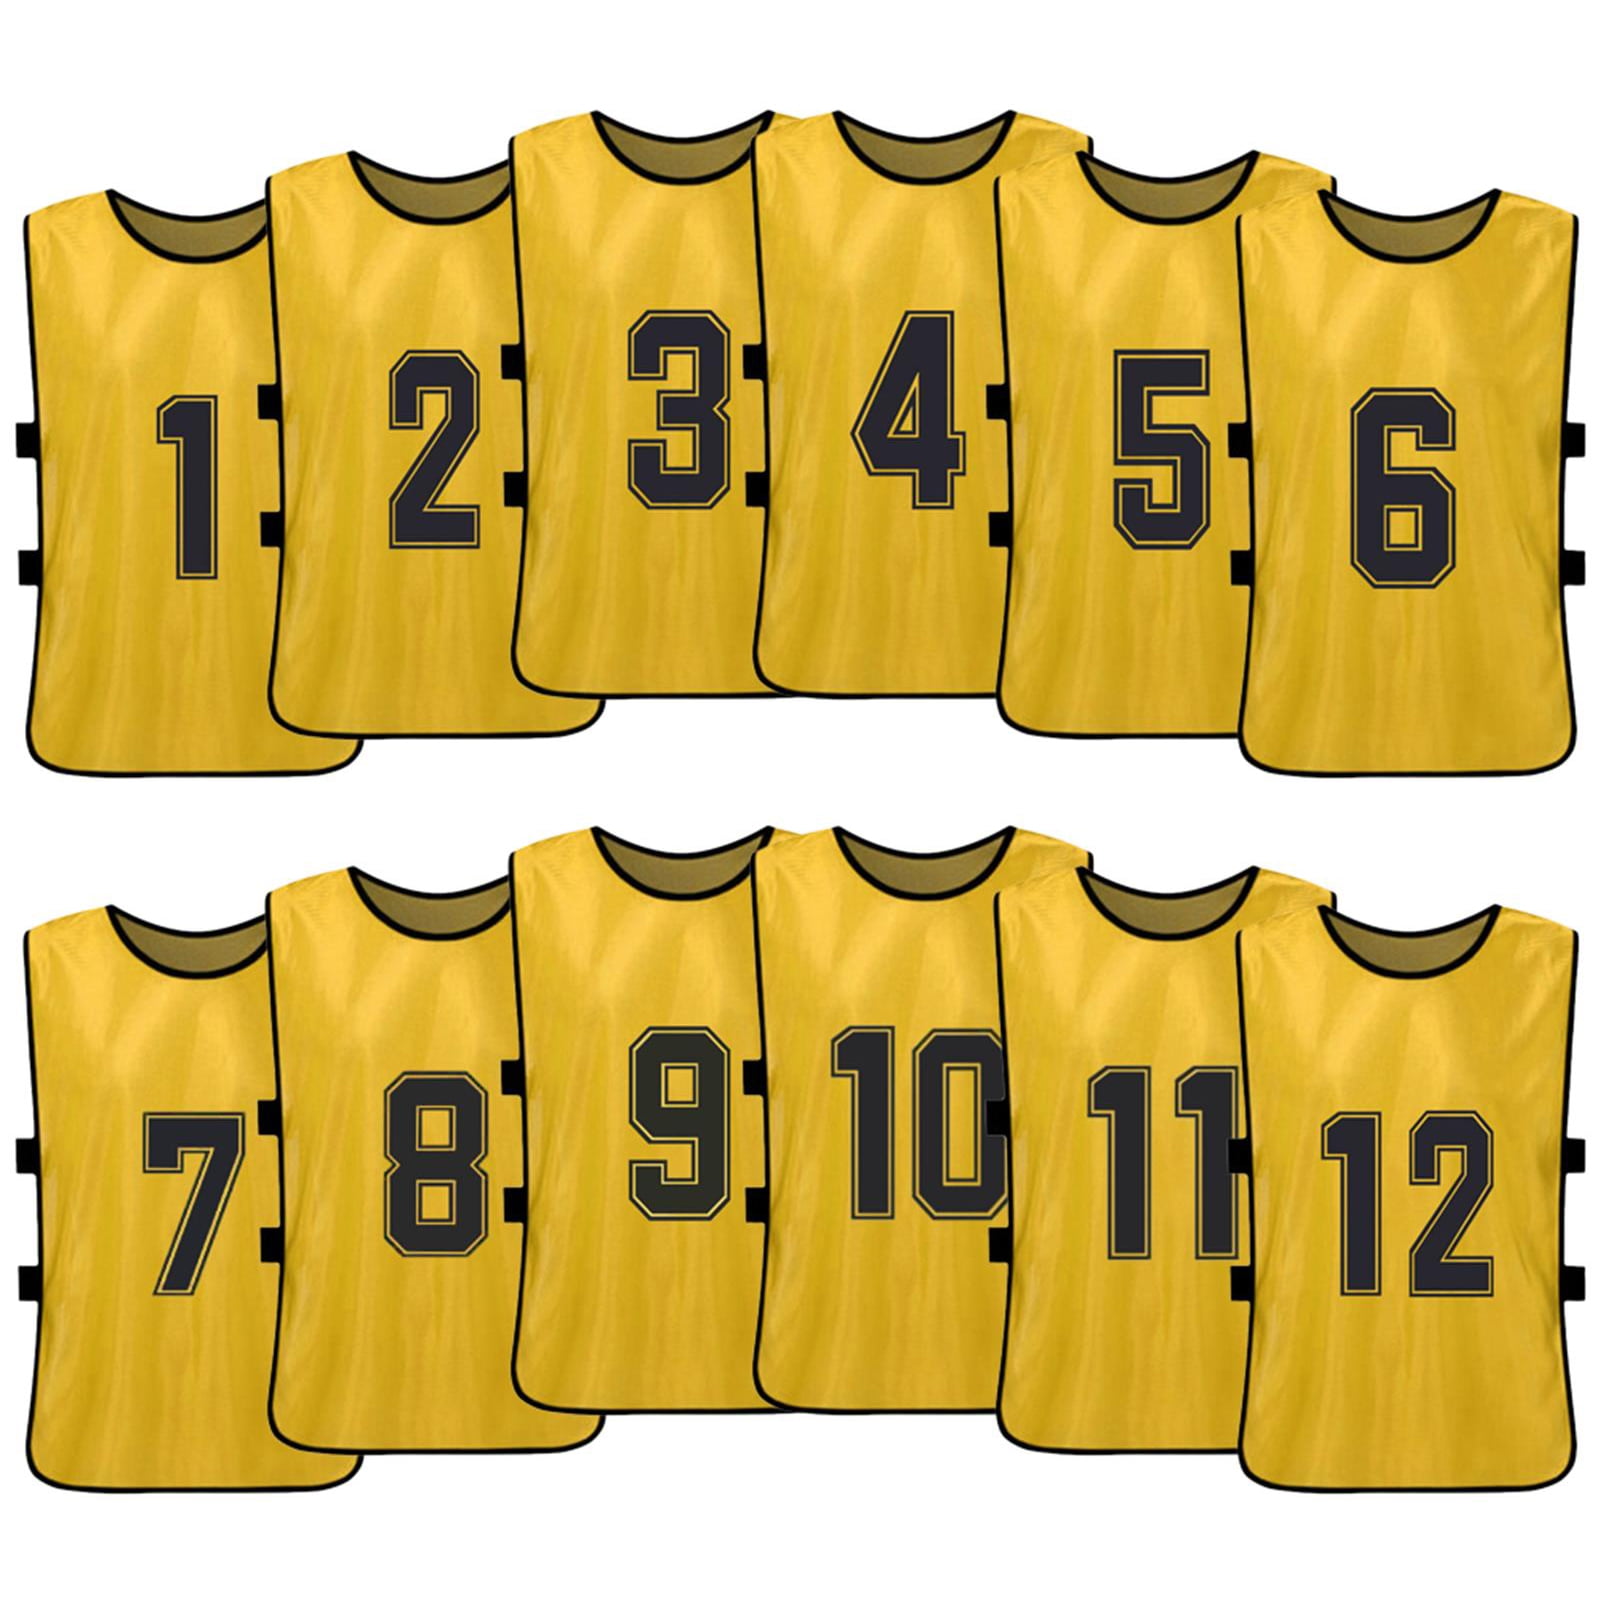 Saaifuu 12 Pack Reversible Numbered Pinnies, Double Sided Scrimmage Vest,Team Practice Jerseys for Kids and Adult